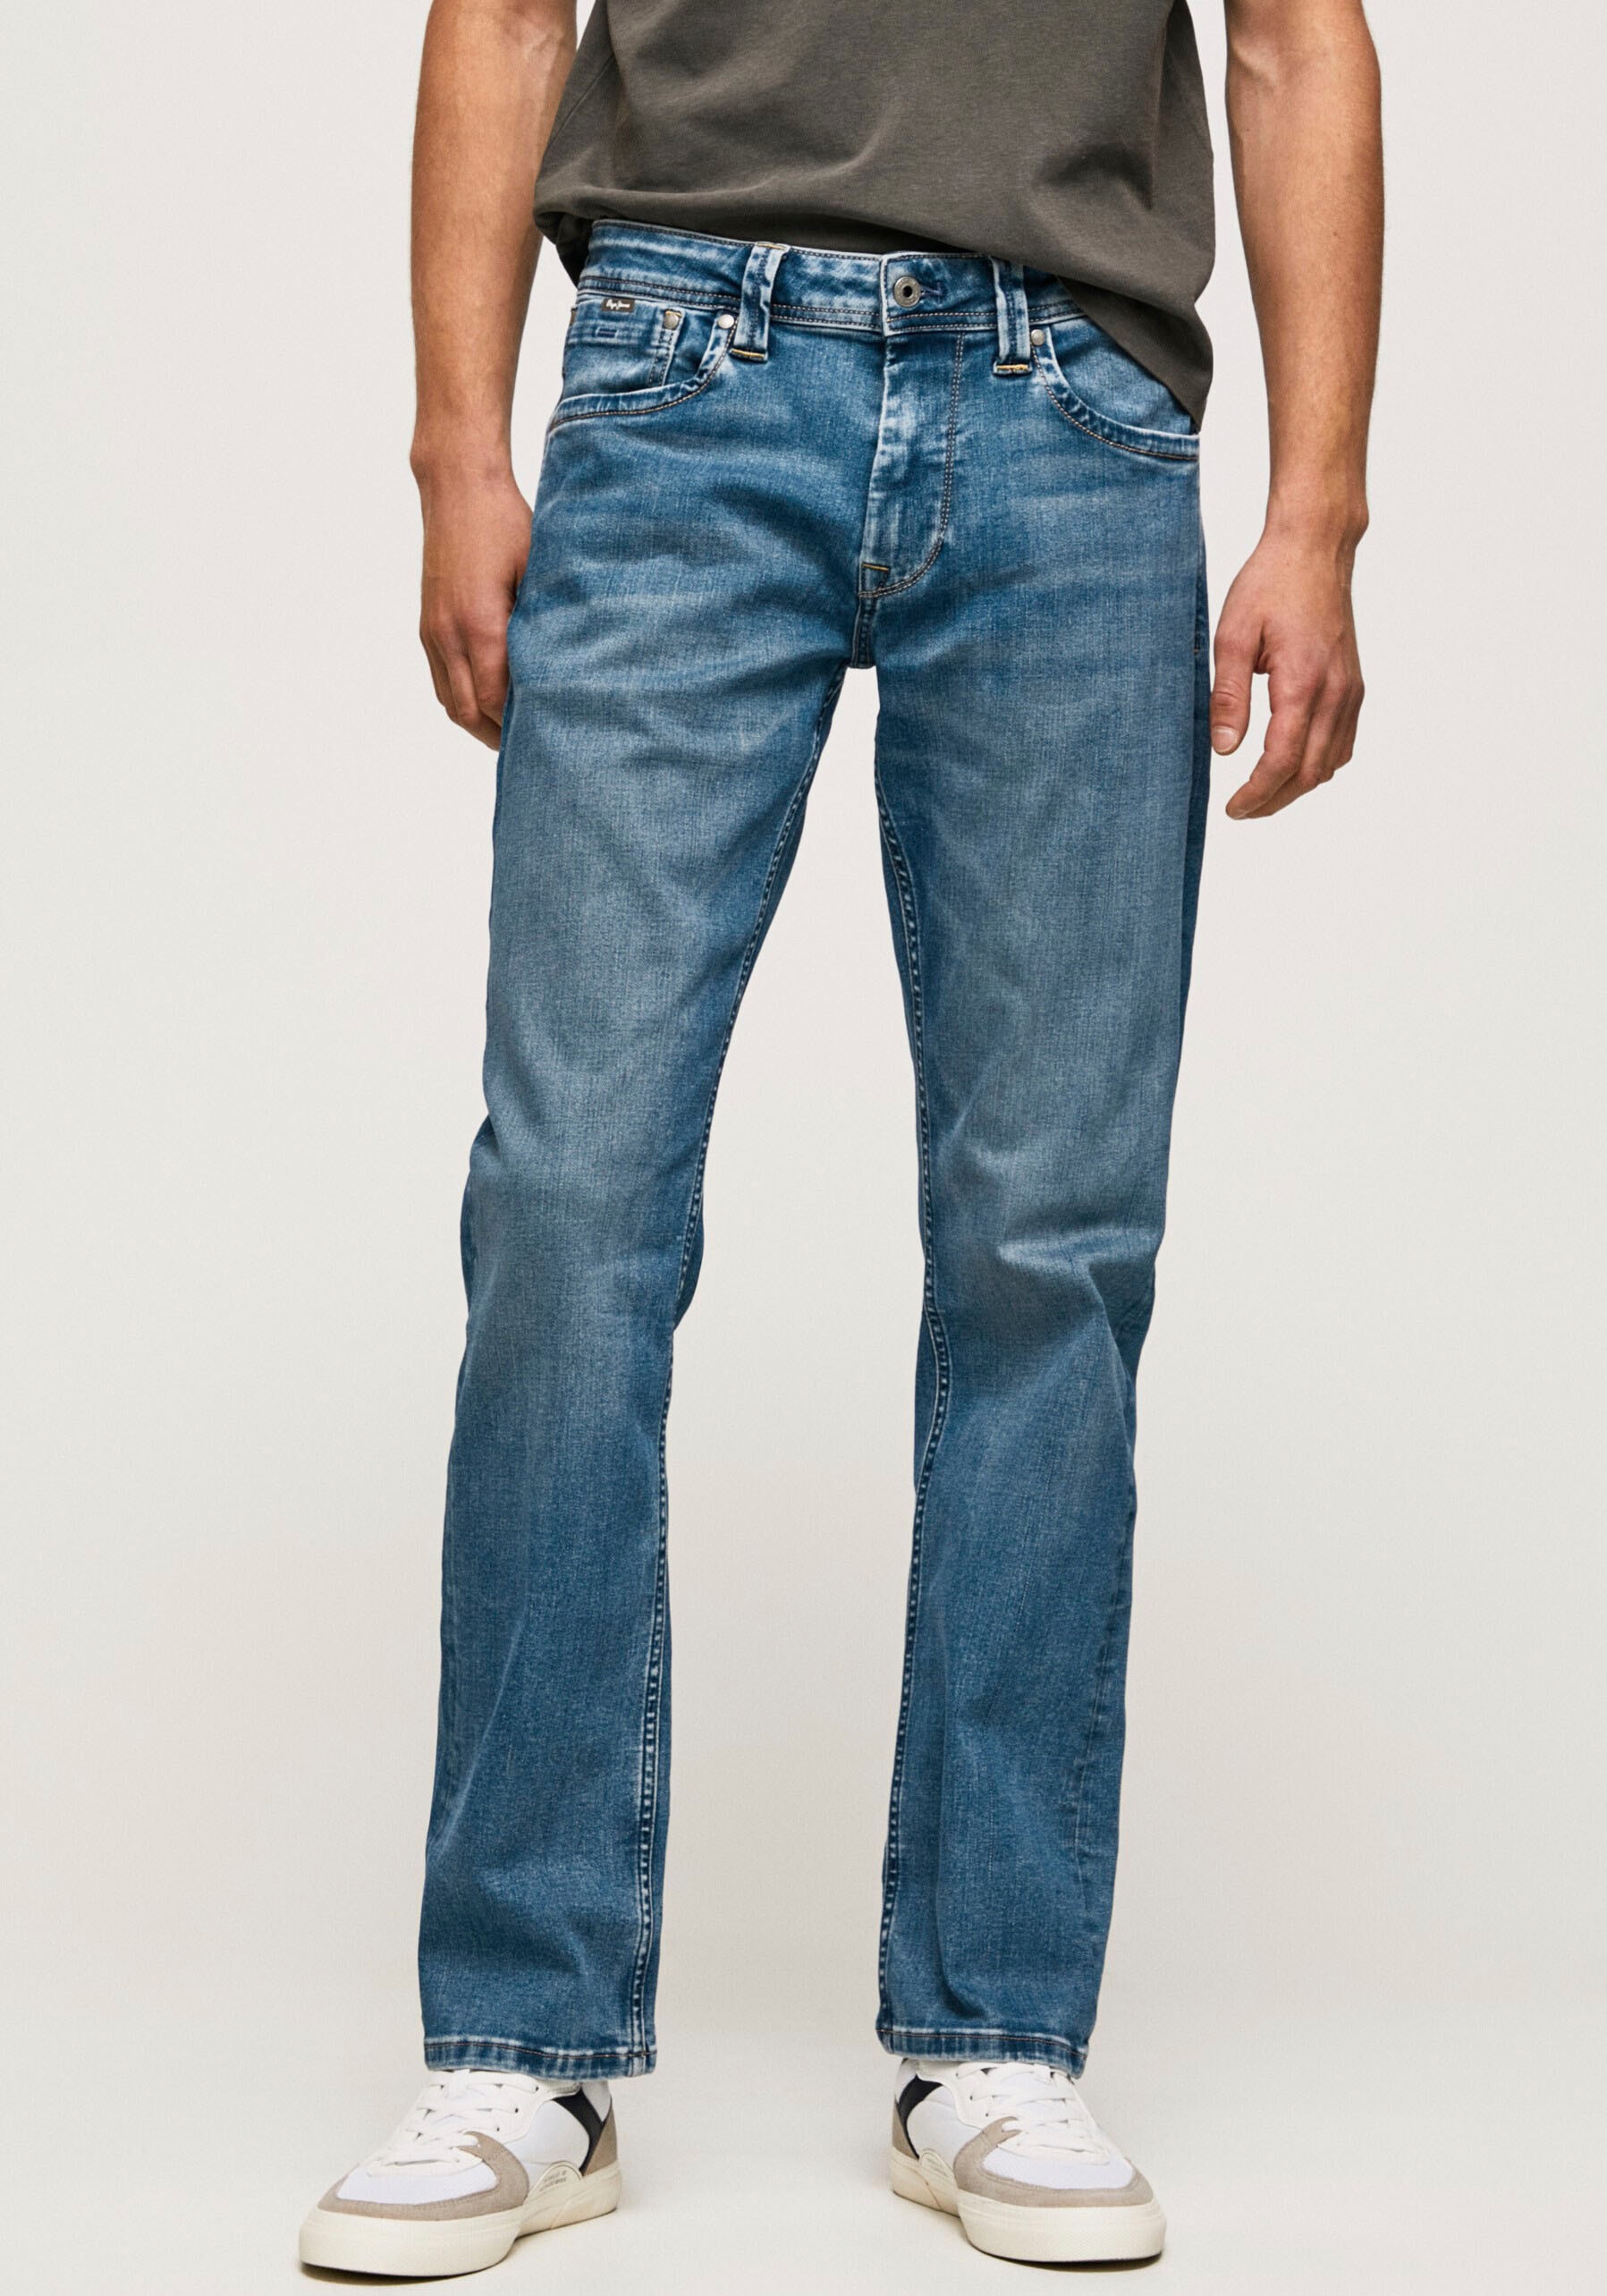 Pepe Jeans Straight-Jeans »KINGSTON ZIP« von Pepe Jeans